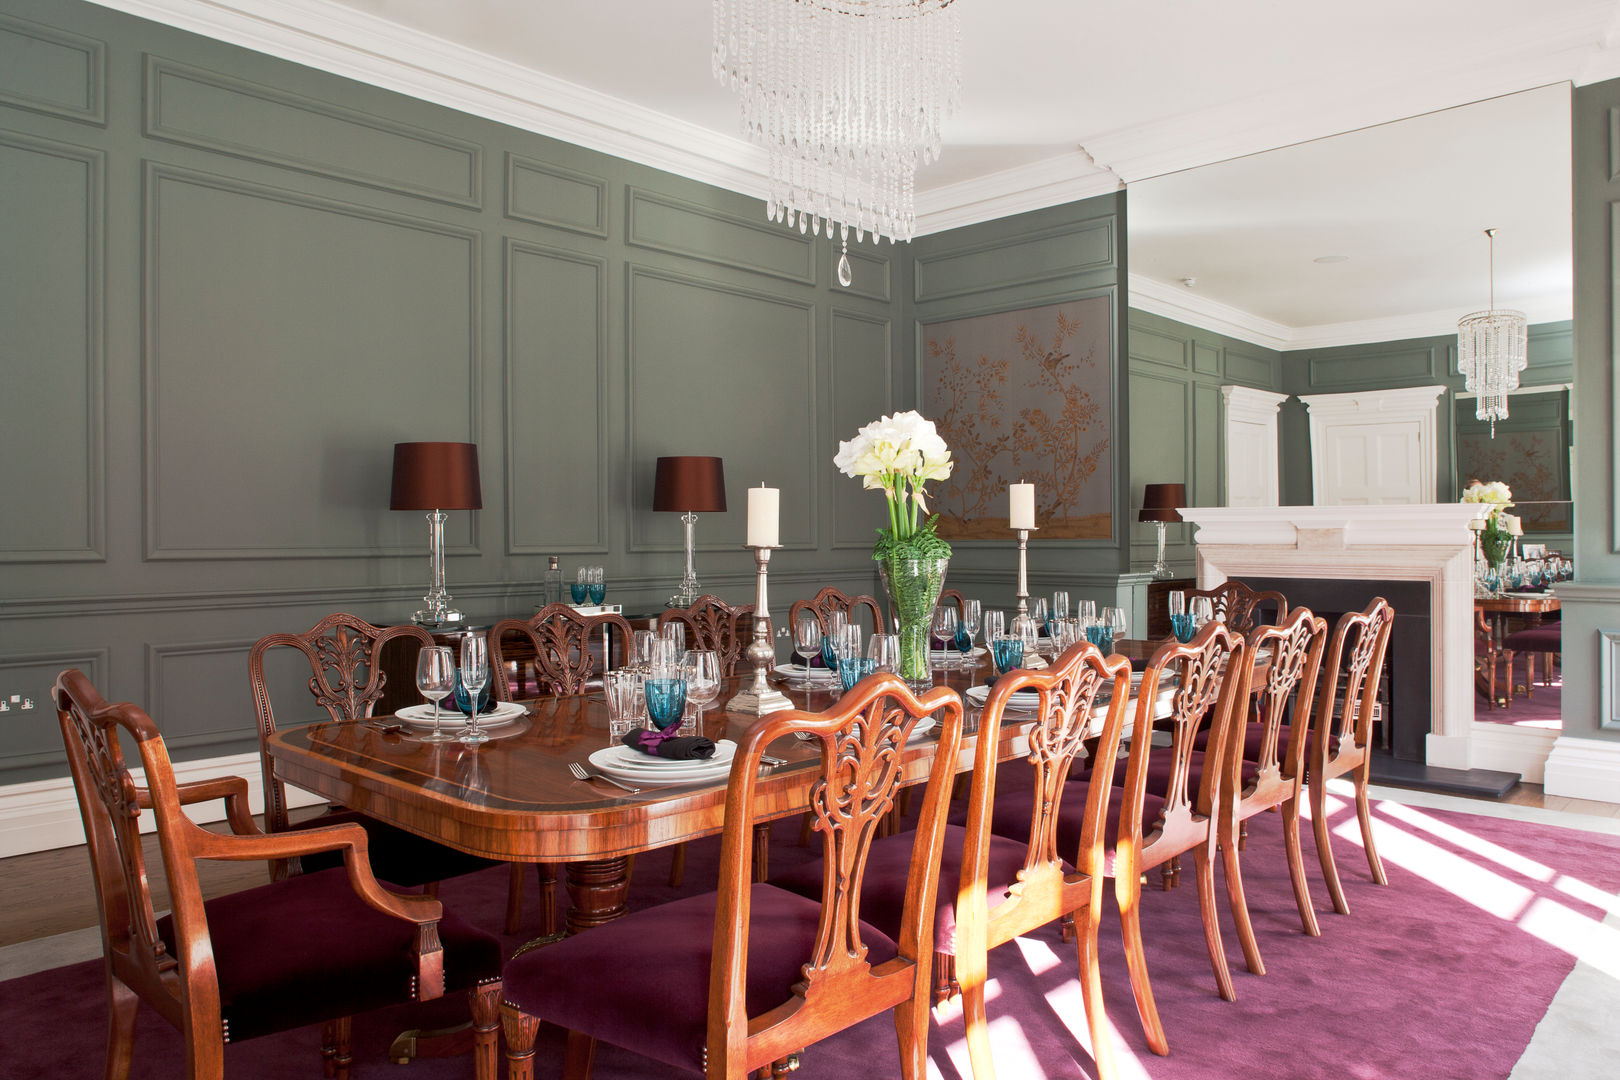 Dining Area Roselind Wilson Design Moderne eetkamers dining room,dining table,lamps,wall panelling,flowers,mirror,traditional,interior design